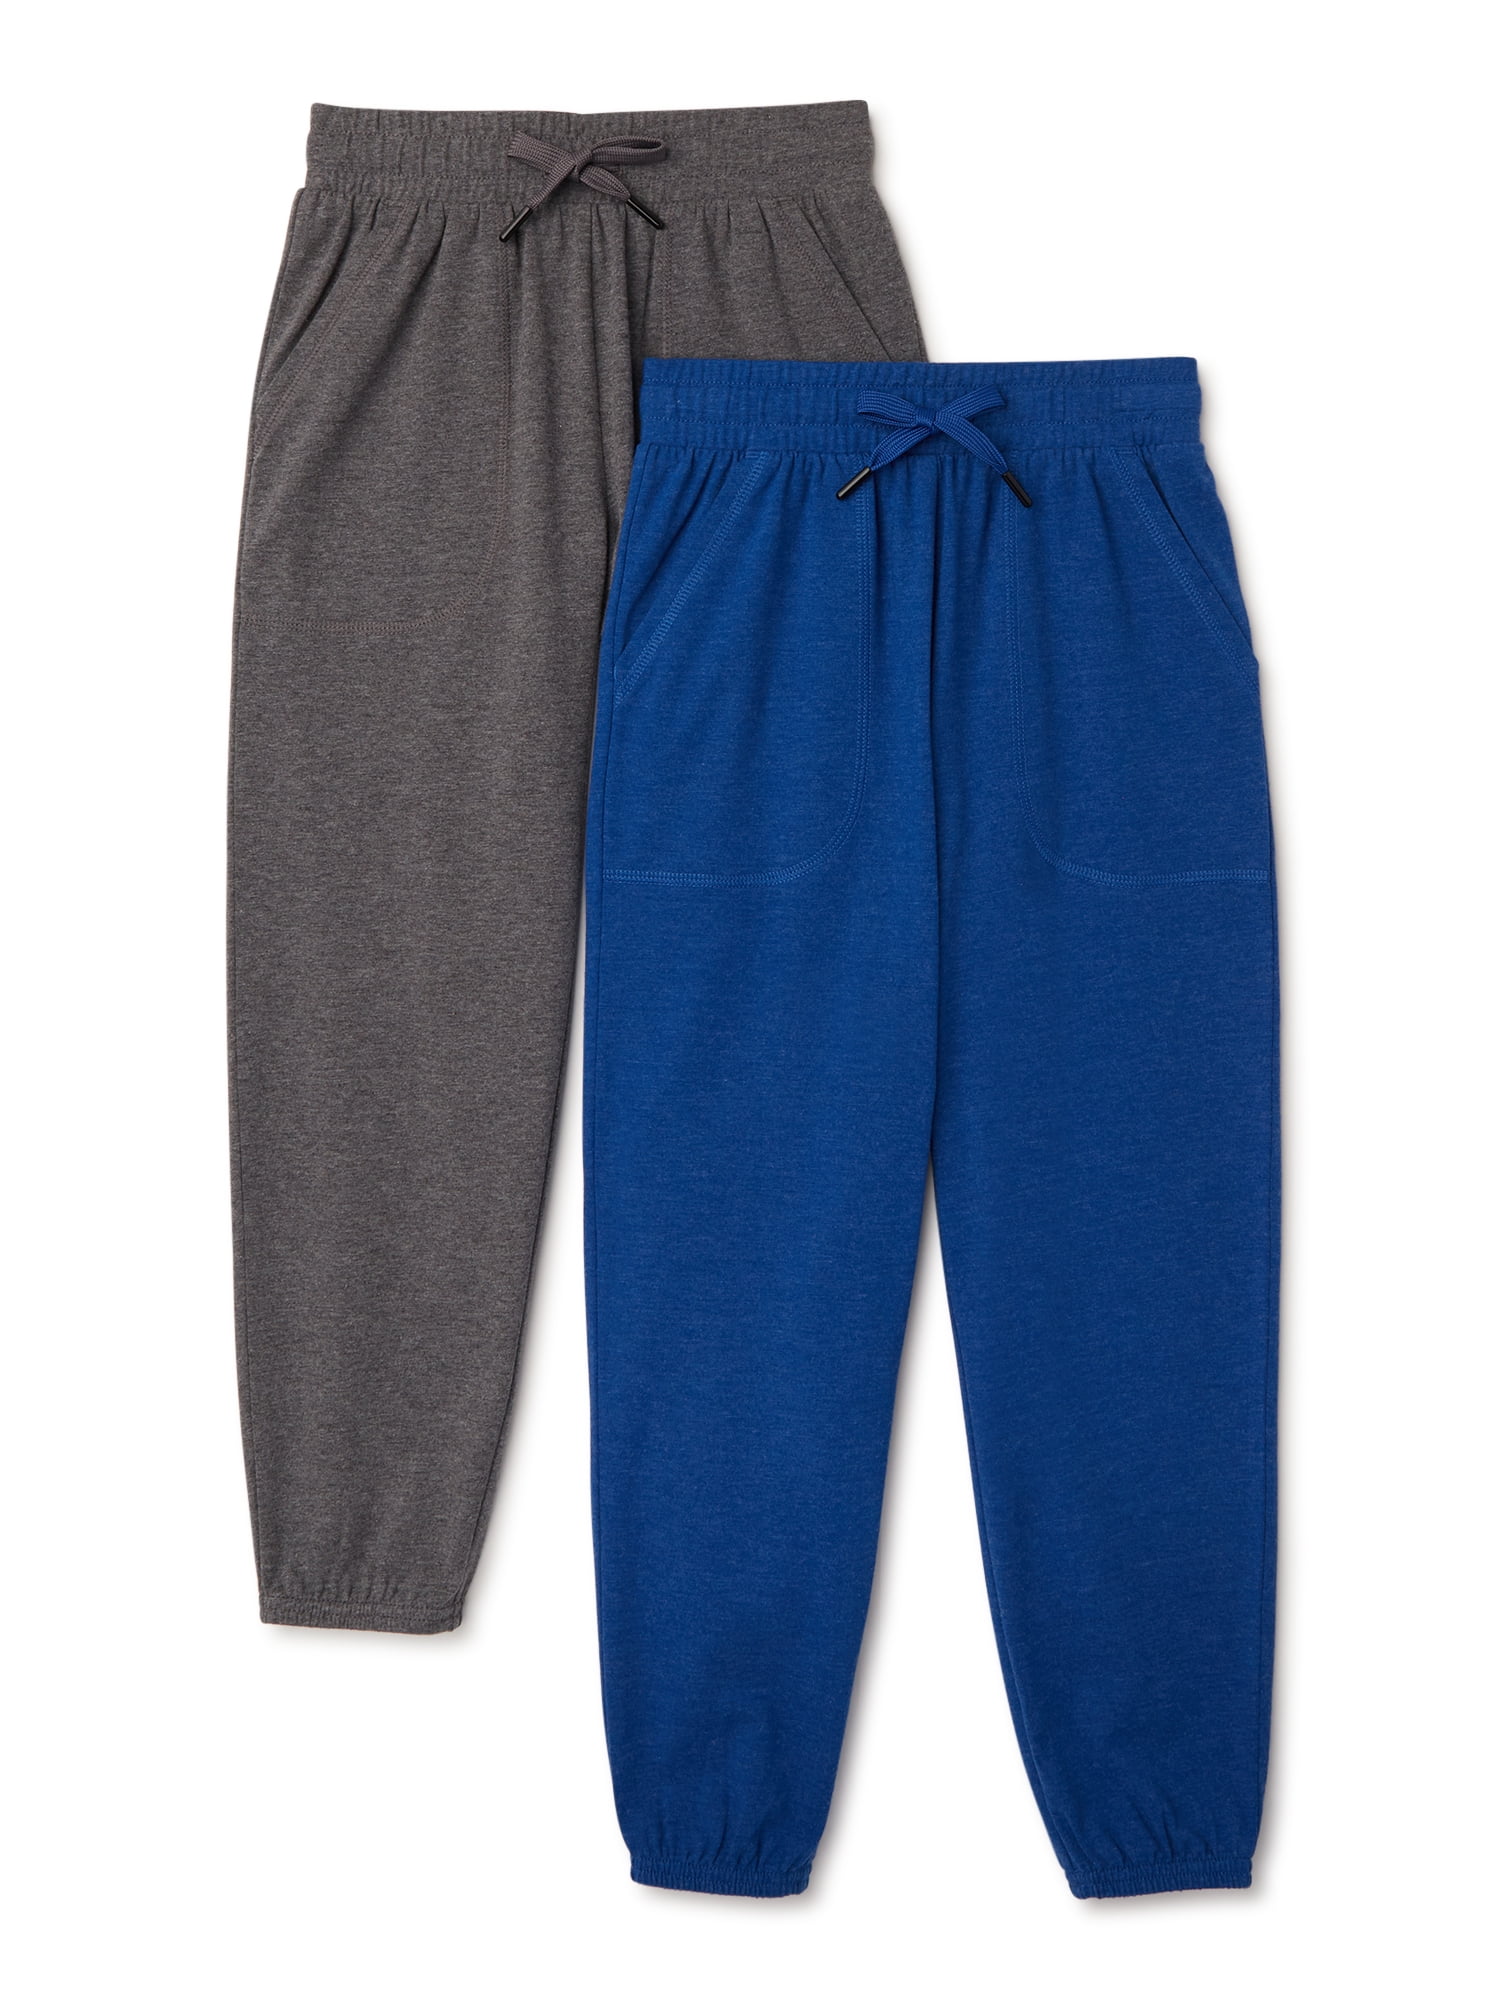 5-pack jersey joggers - Bright blue/Grey - Kids